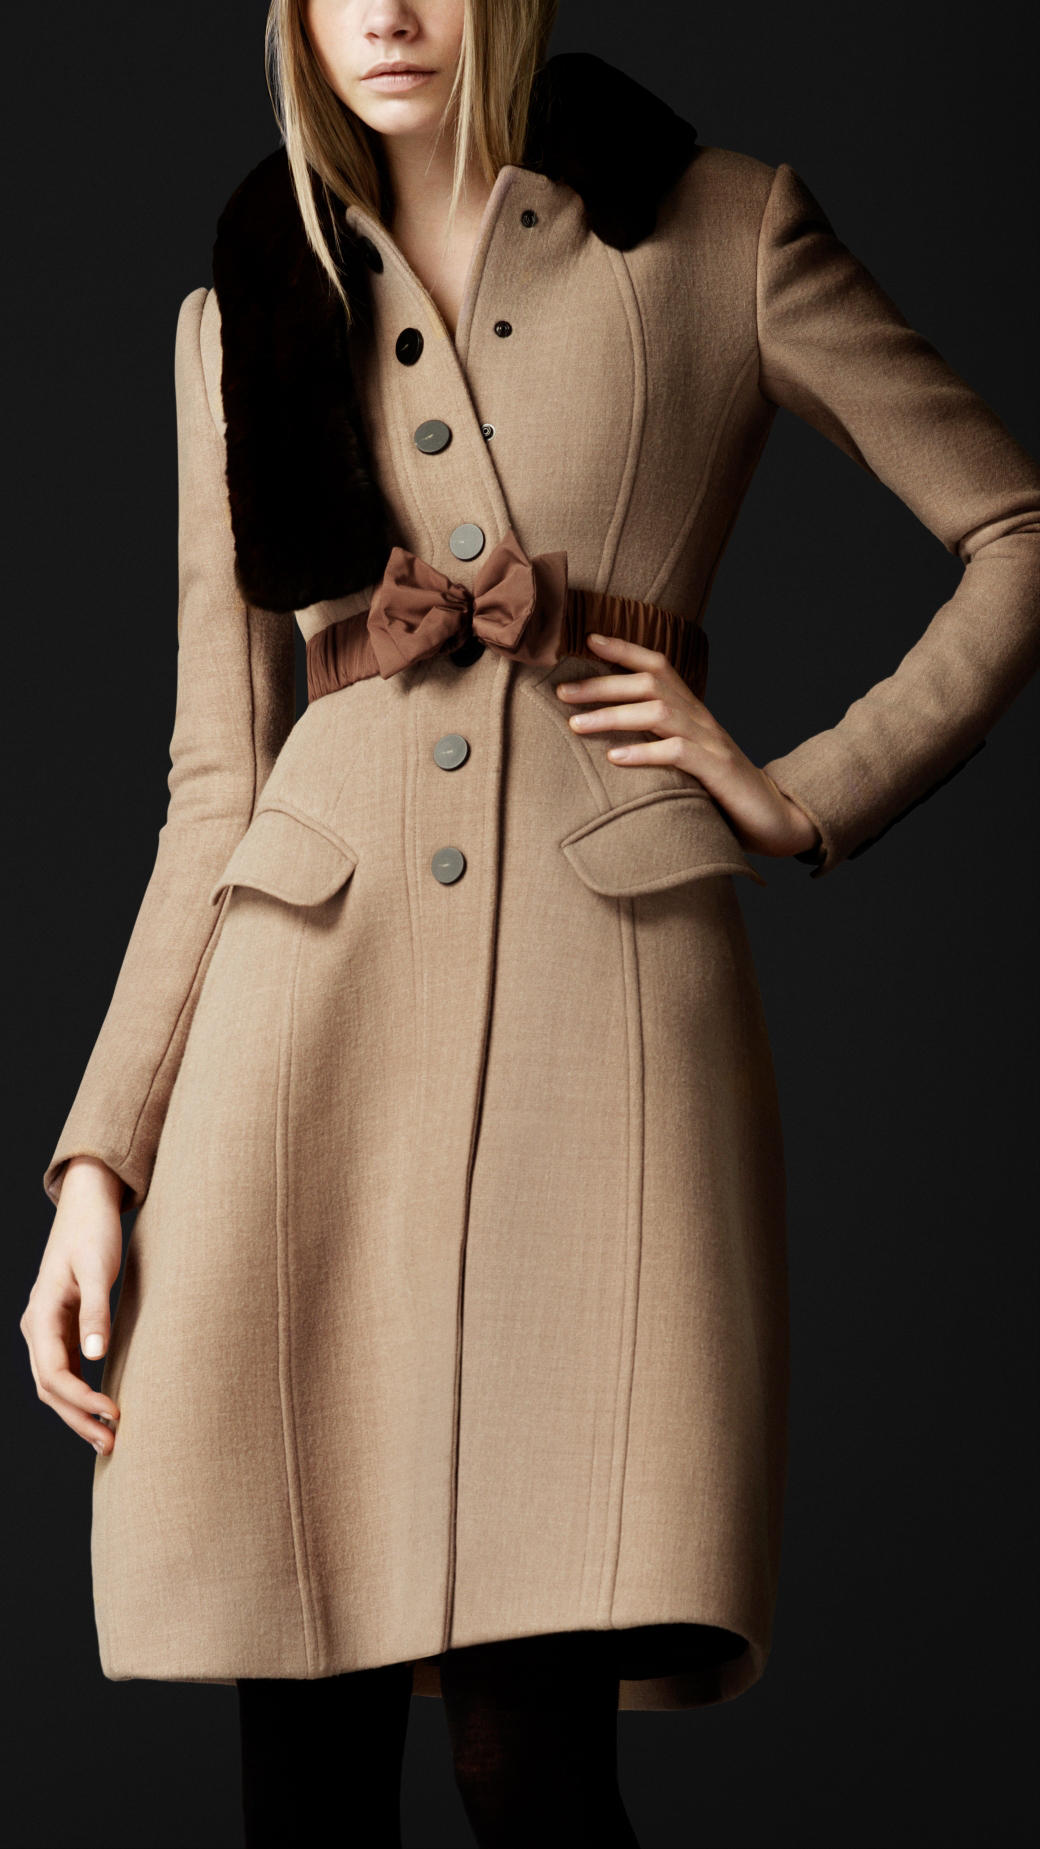 Lyst - Burberry Prorsum Crêpe Wool Tailored Coat in Natural